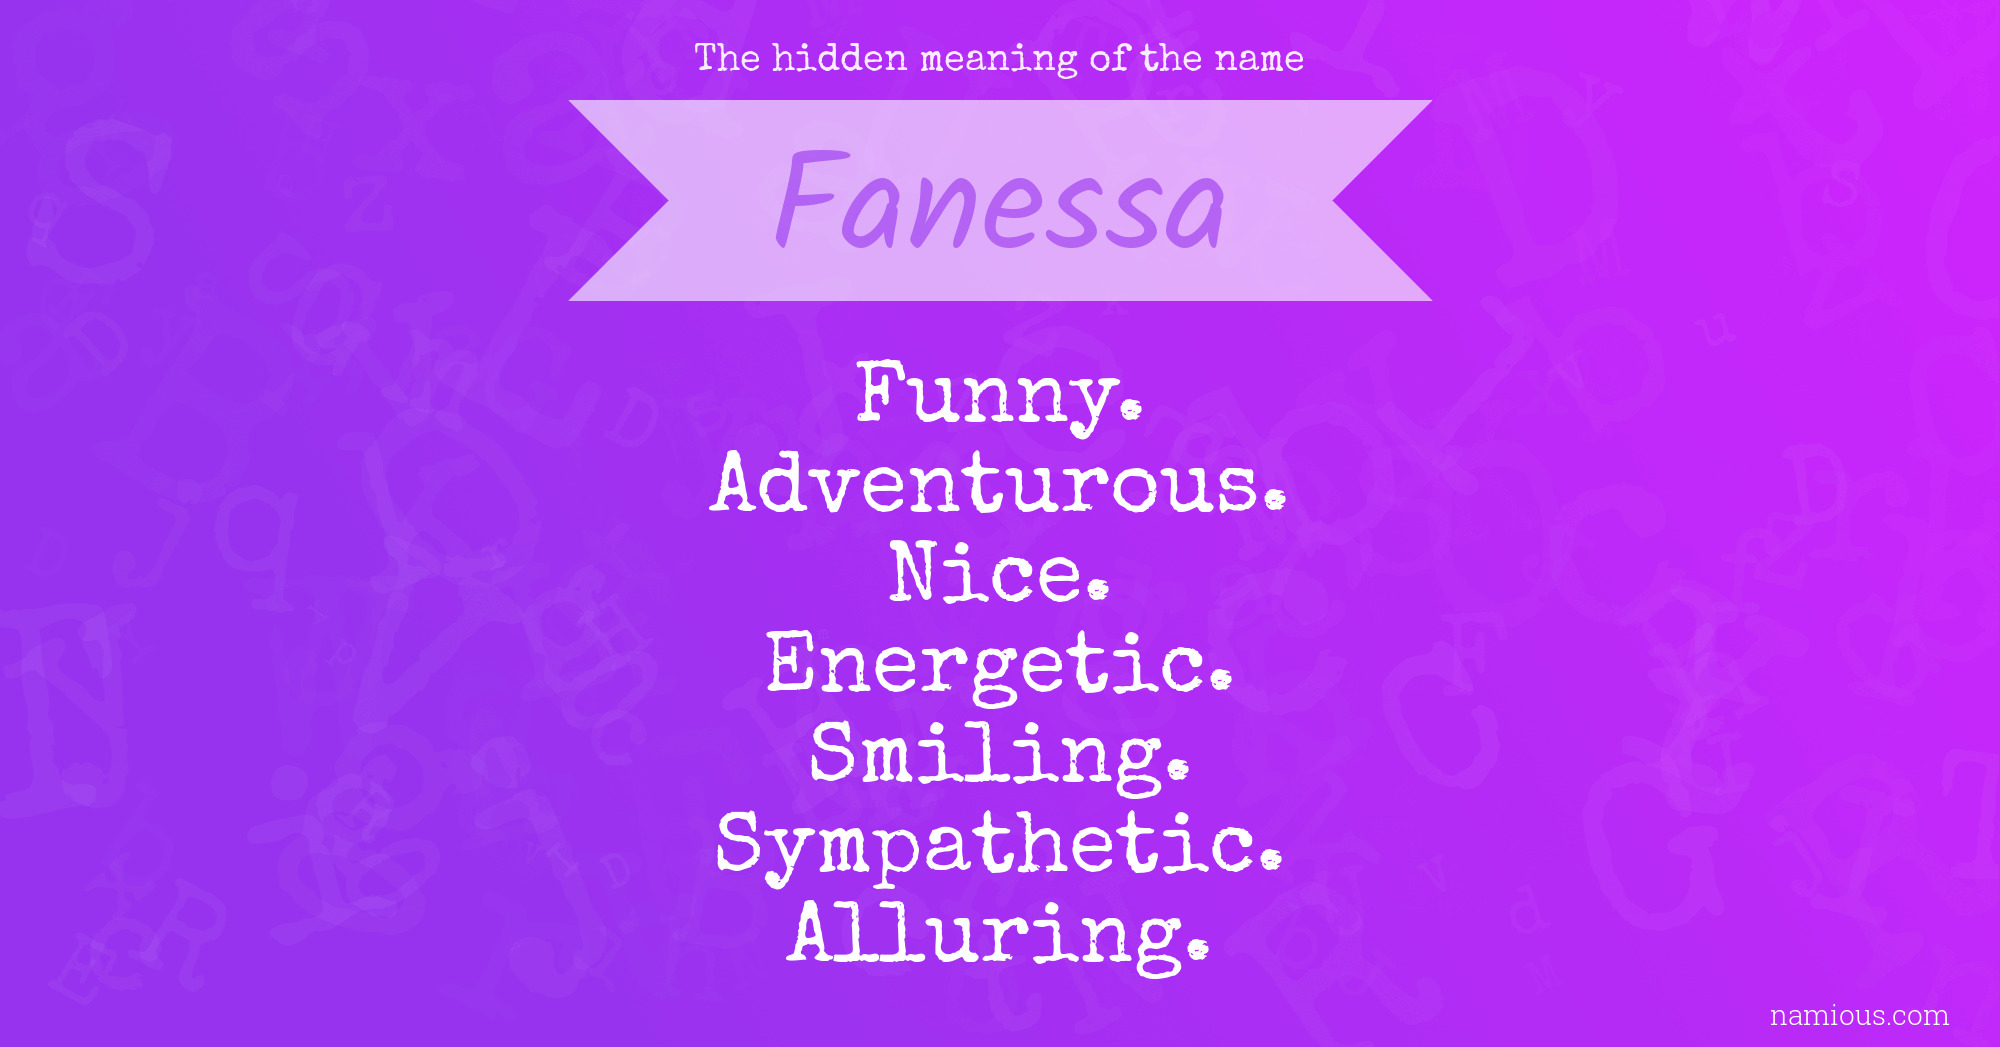 The hidden meaning of the name Fanessa